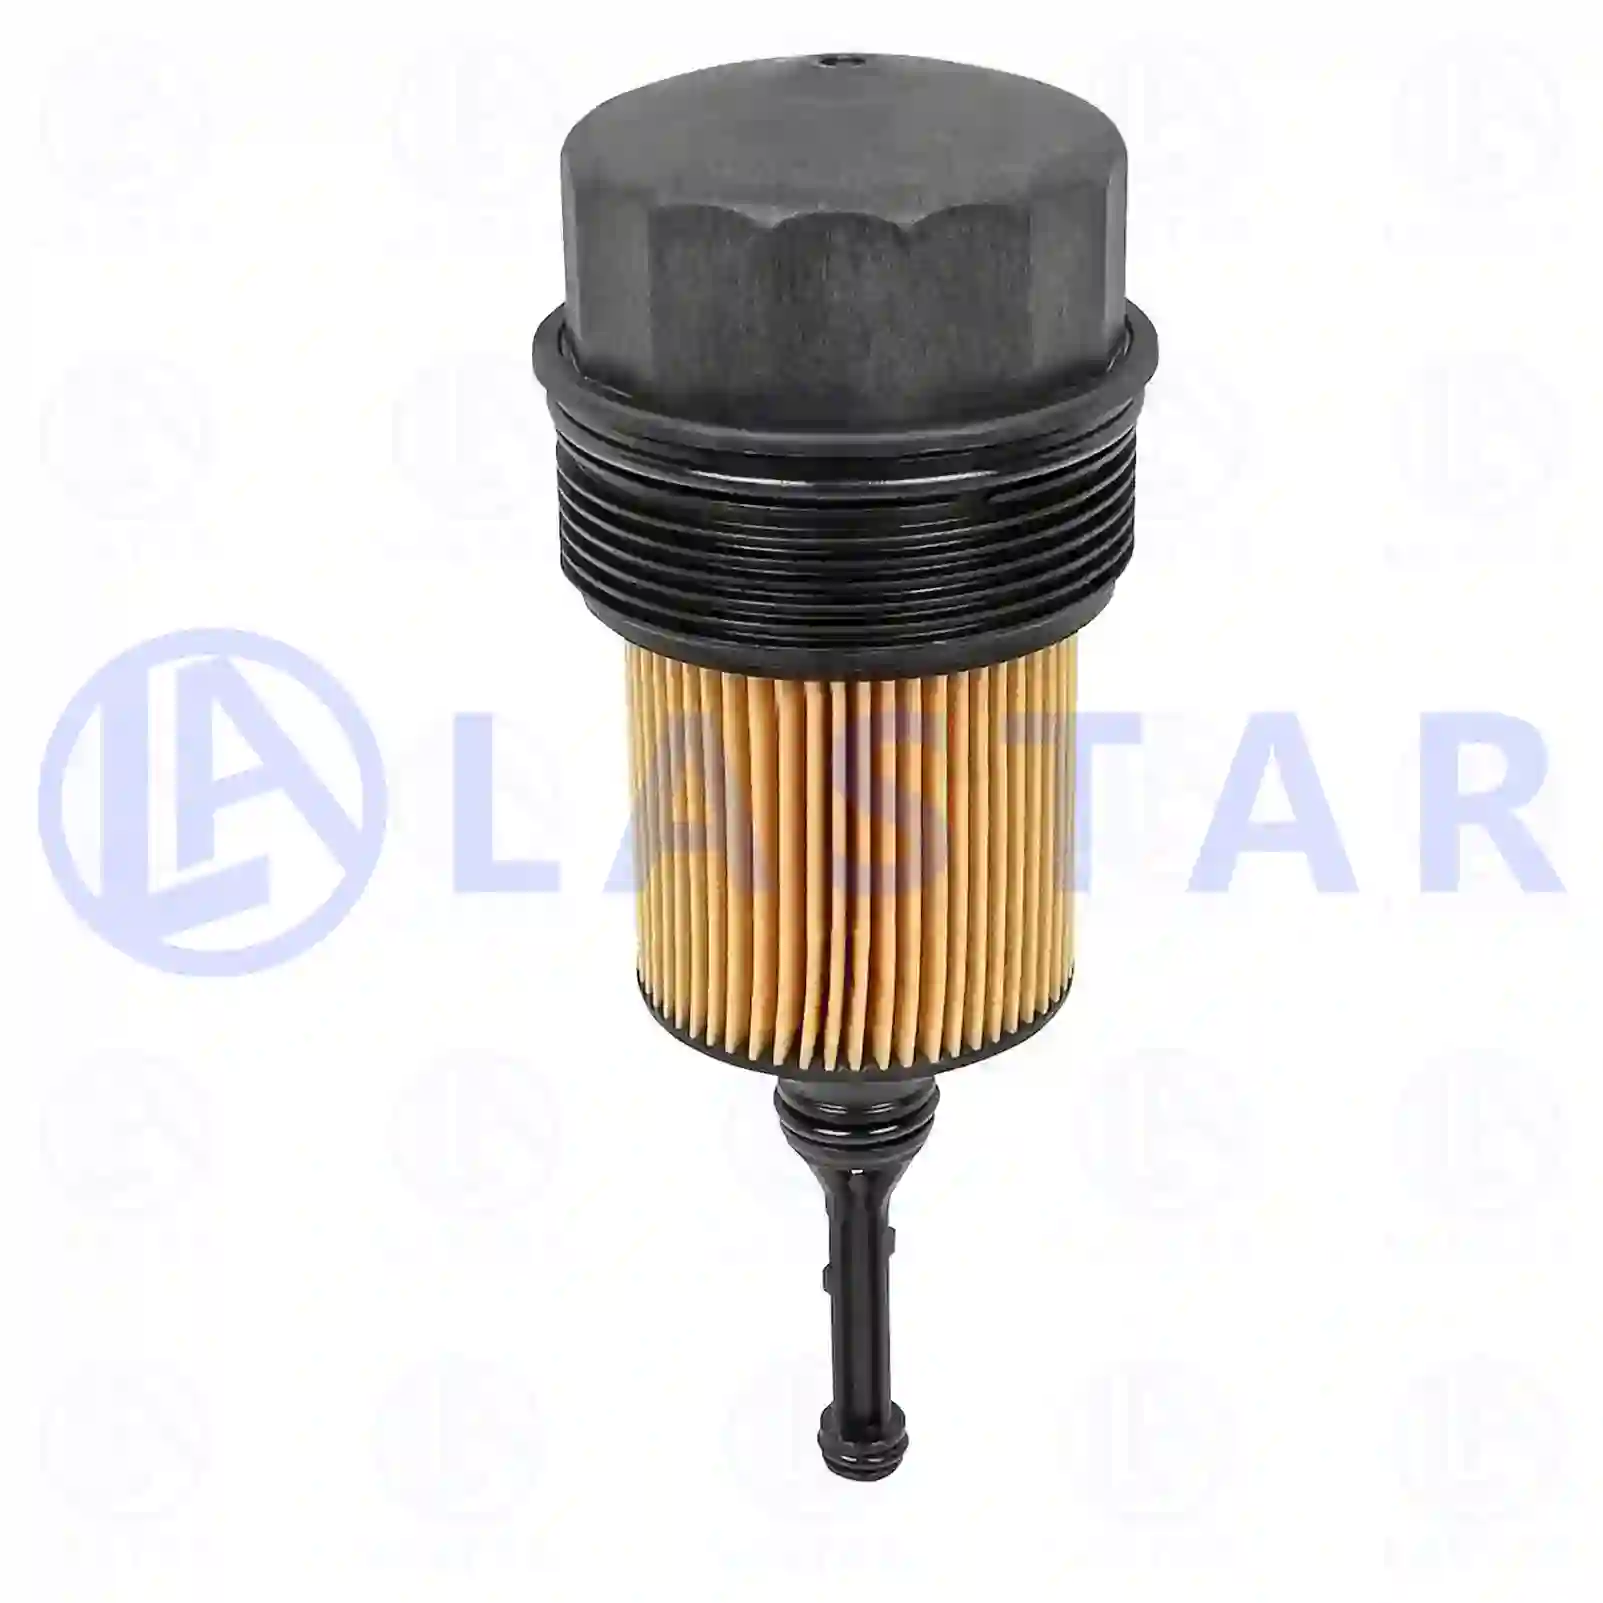  Oil filter cover, with filter || Lastar Spare Part | Truck Spare Parts, Auotomotive Spare Parts